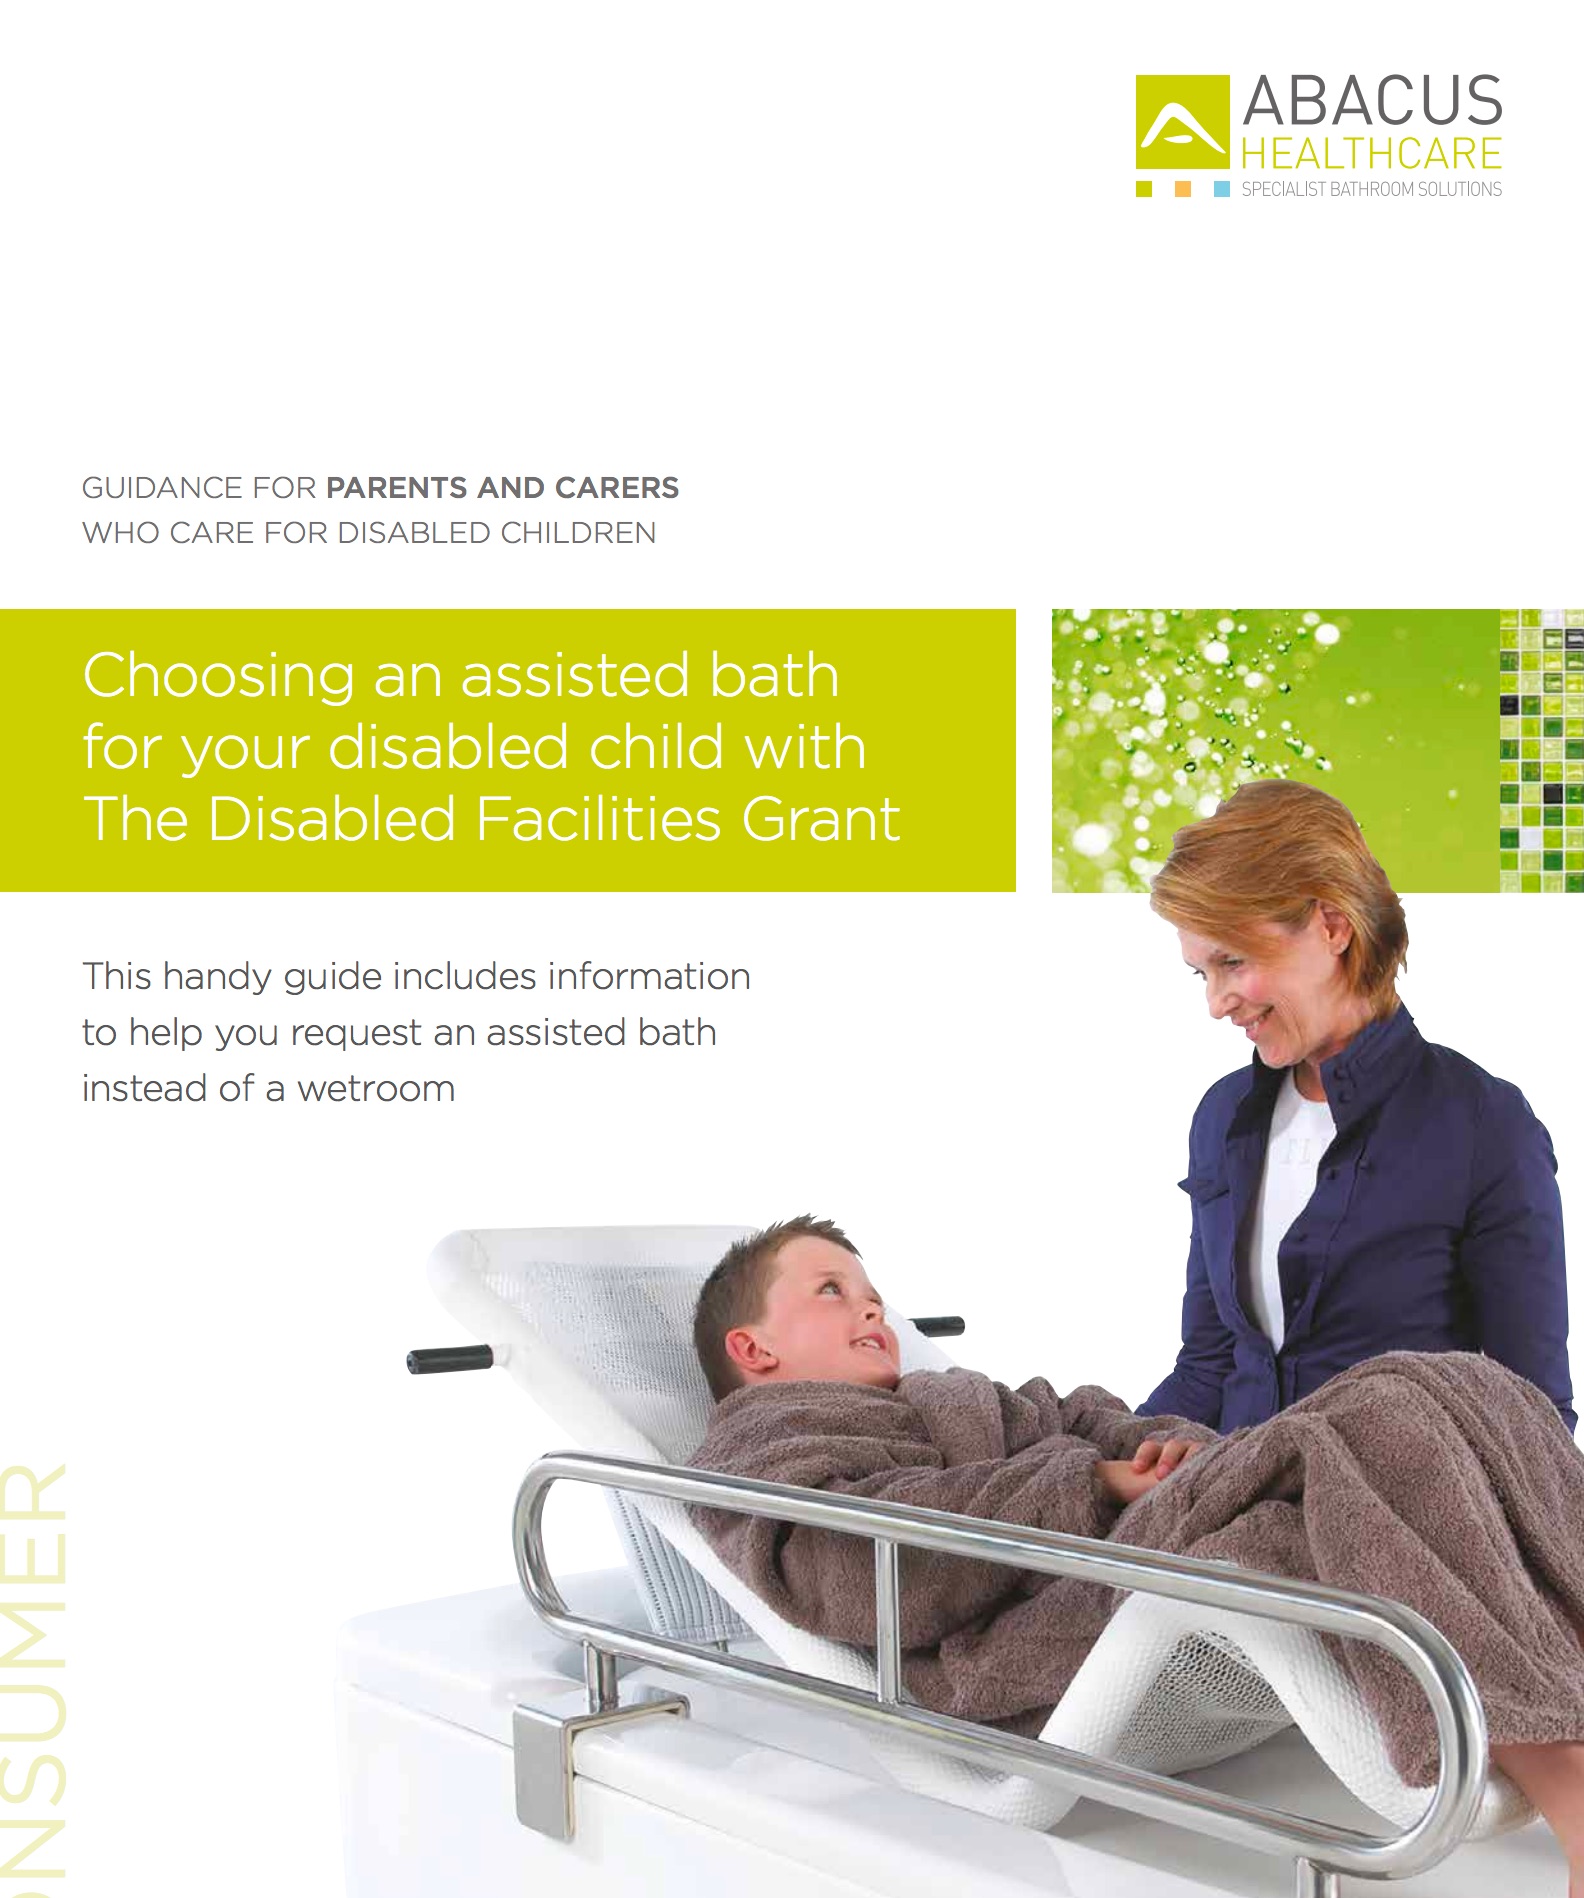 Helpful advice and tips to help you justify an accessible bath for your disabled child, relative or client